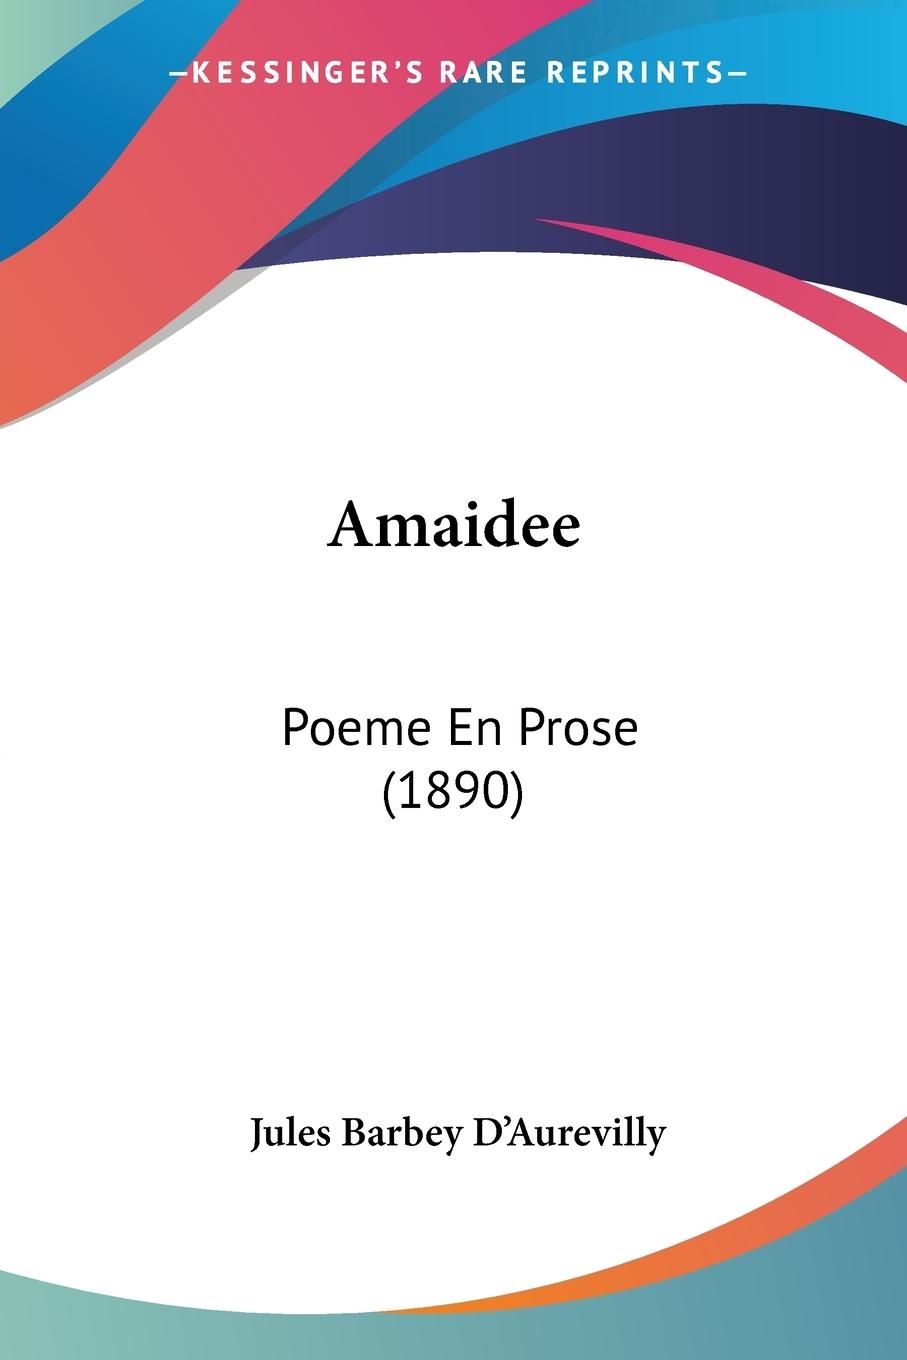 Amaidee - D Aurevilly, Jules Barbey